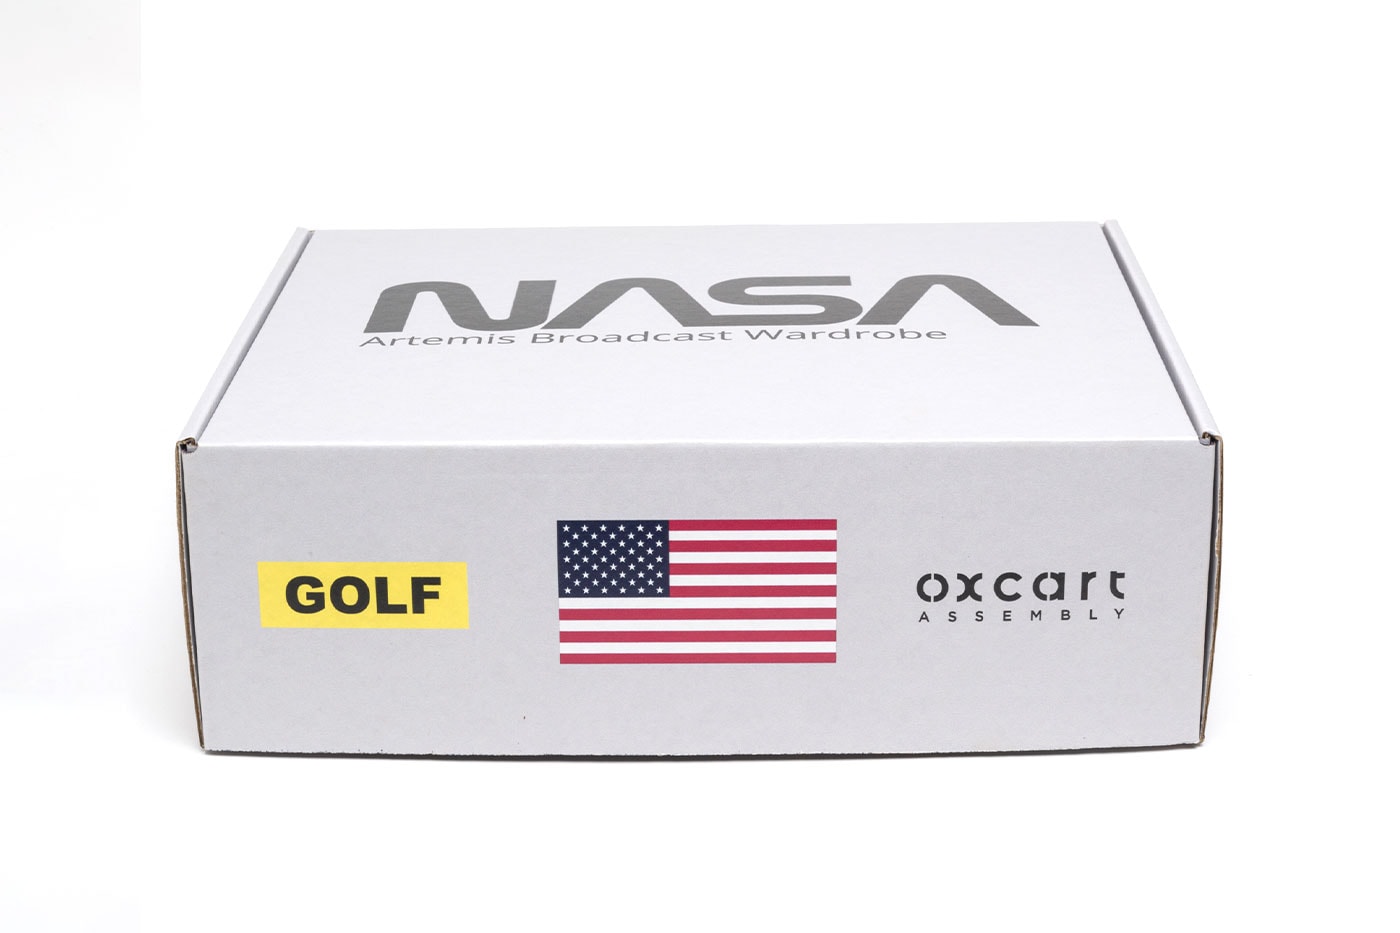 Golf Wang Oxcart Assembly NASA Artemis Space Launch System SLS space exploration basecamp mars info 